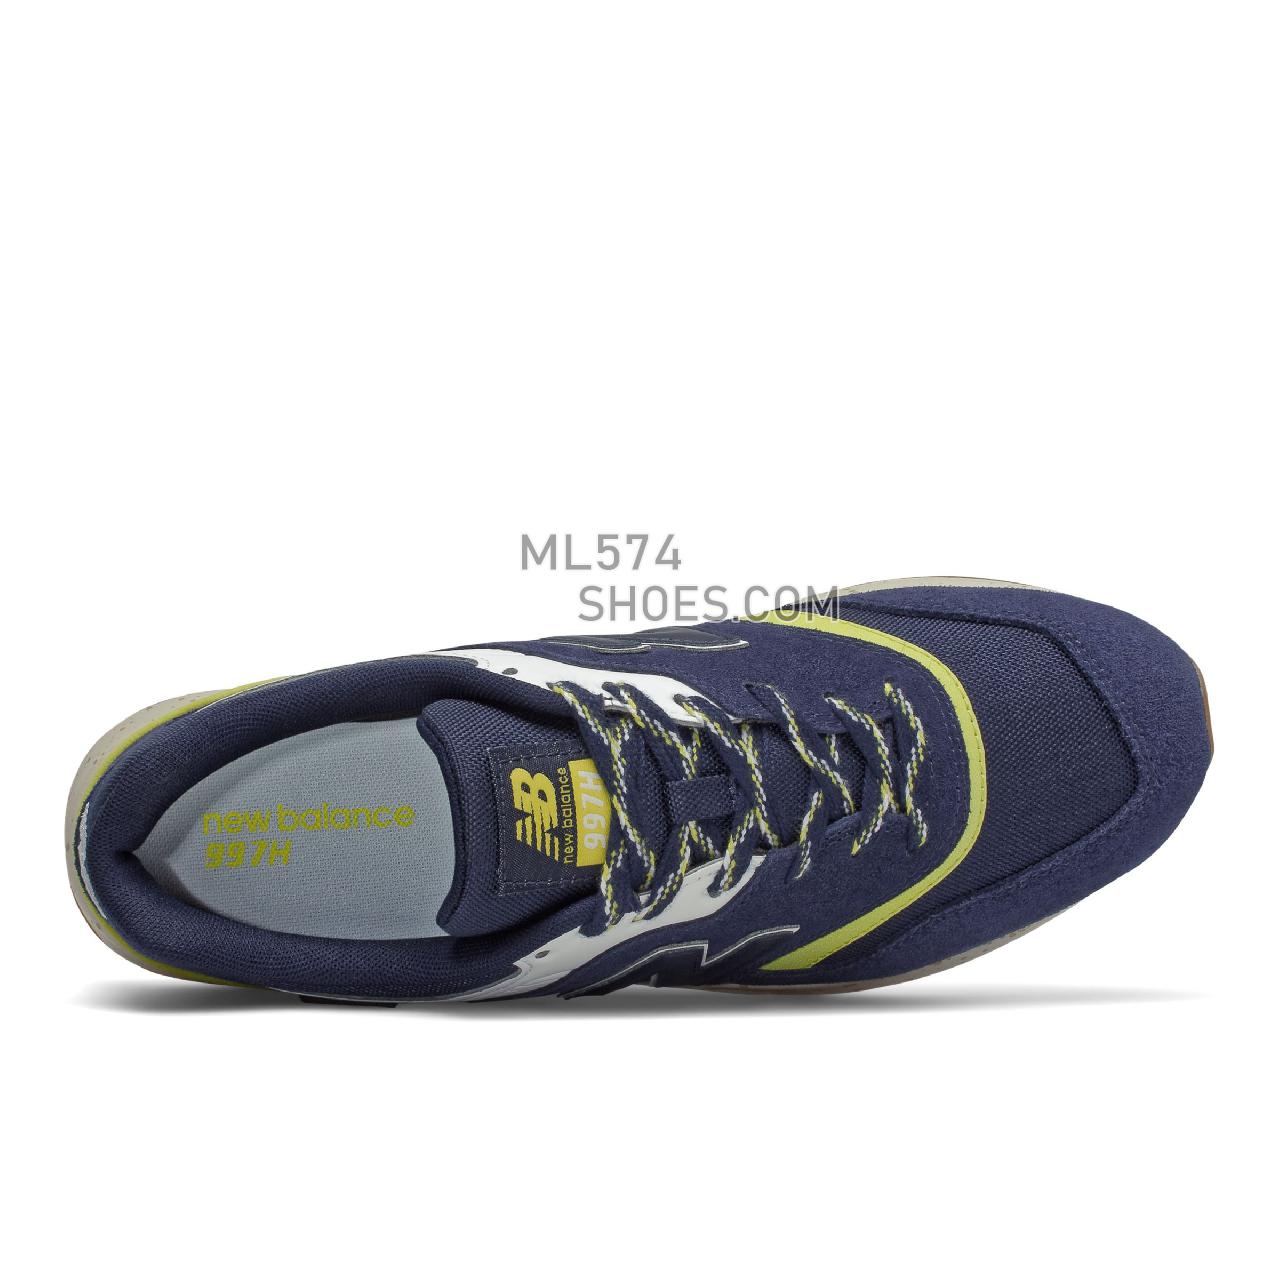 New Balance 997H - Men's Classic Sneakers - Pigment with Sulpher Yellow - CM997HAA